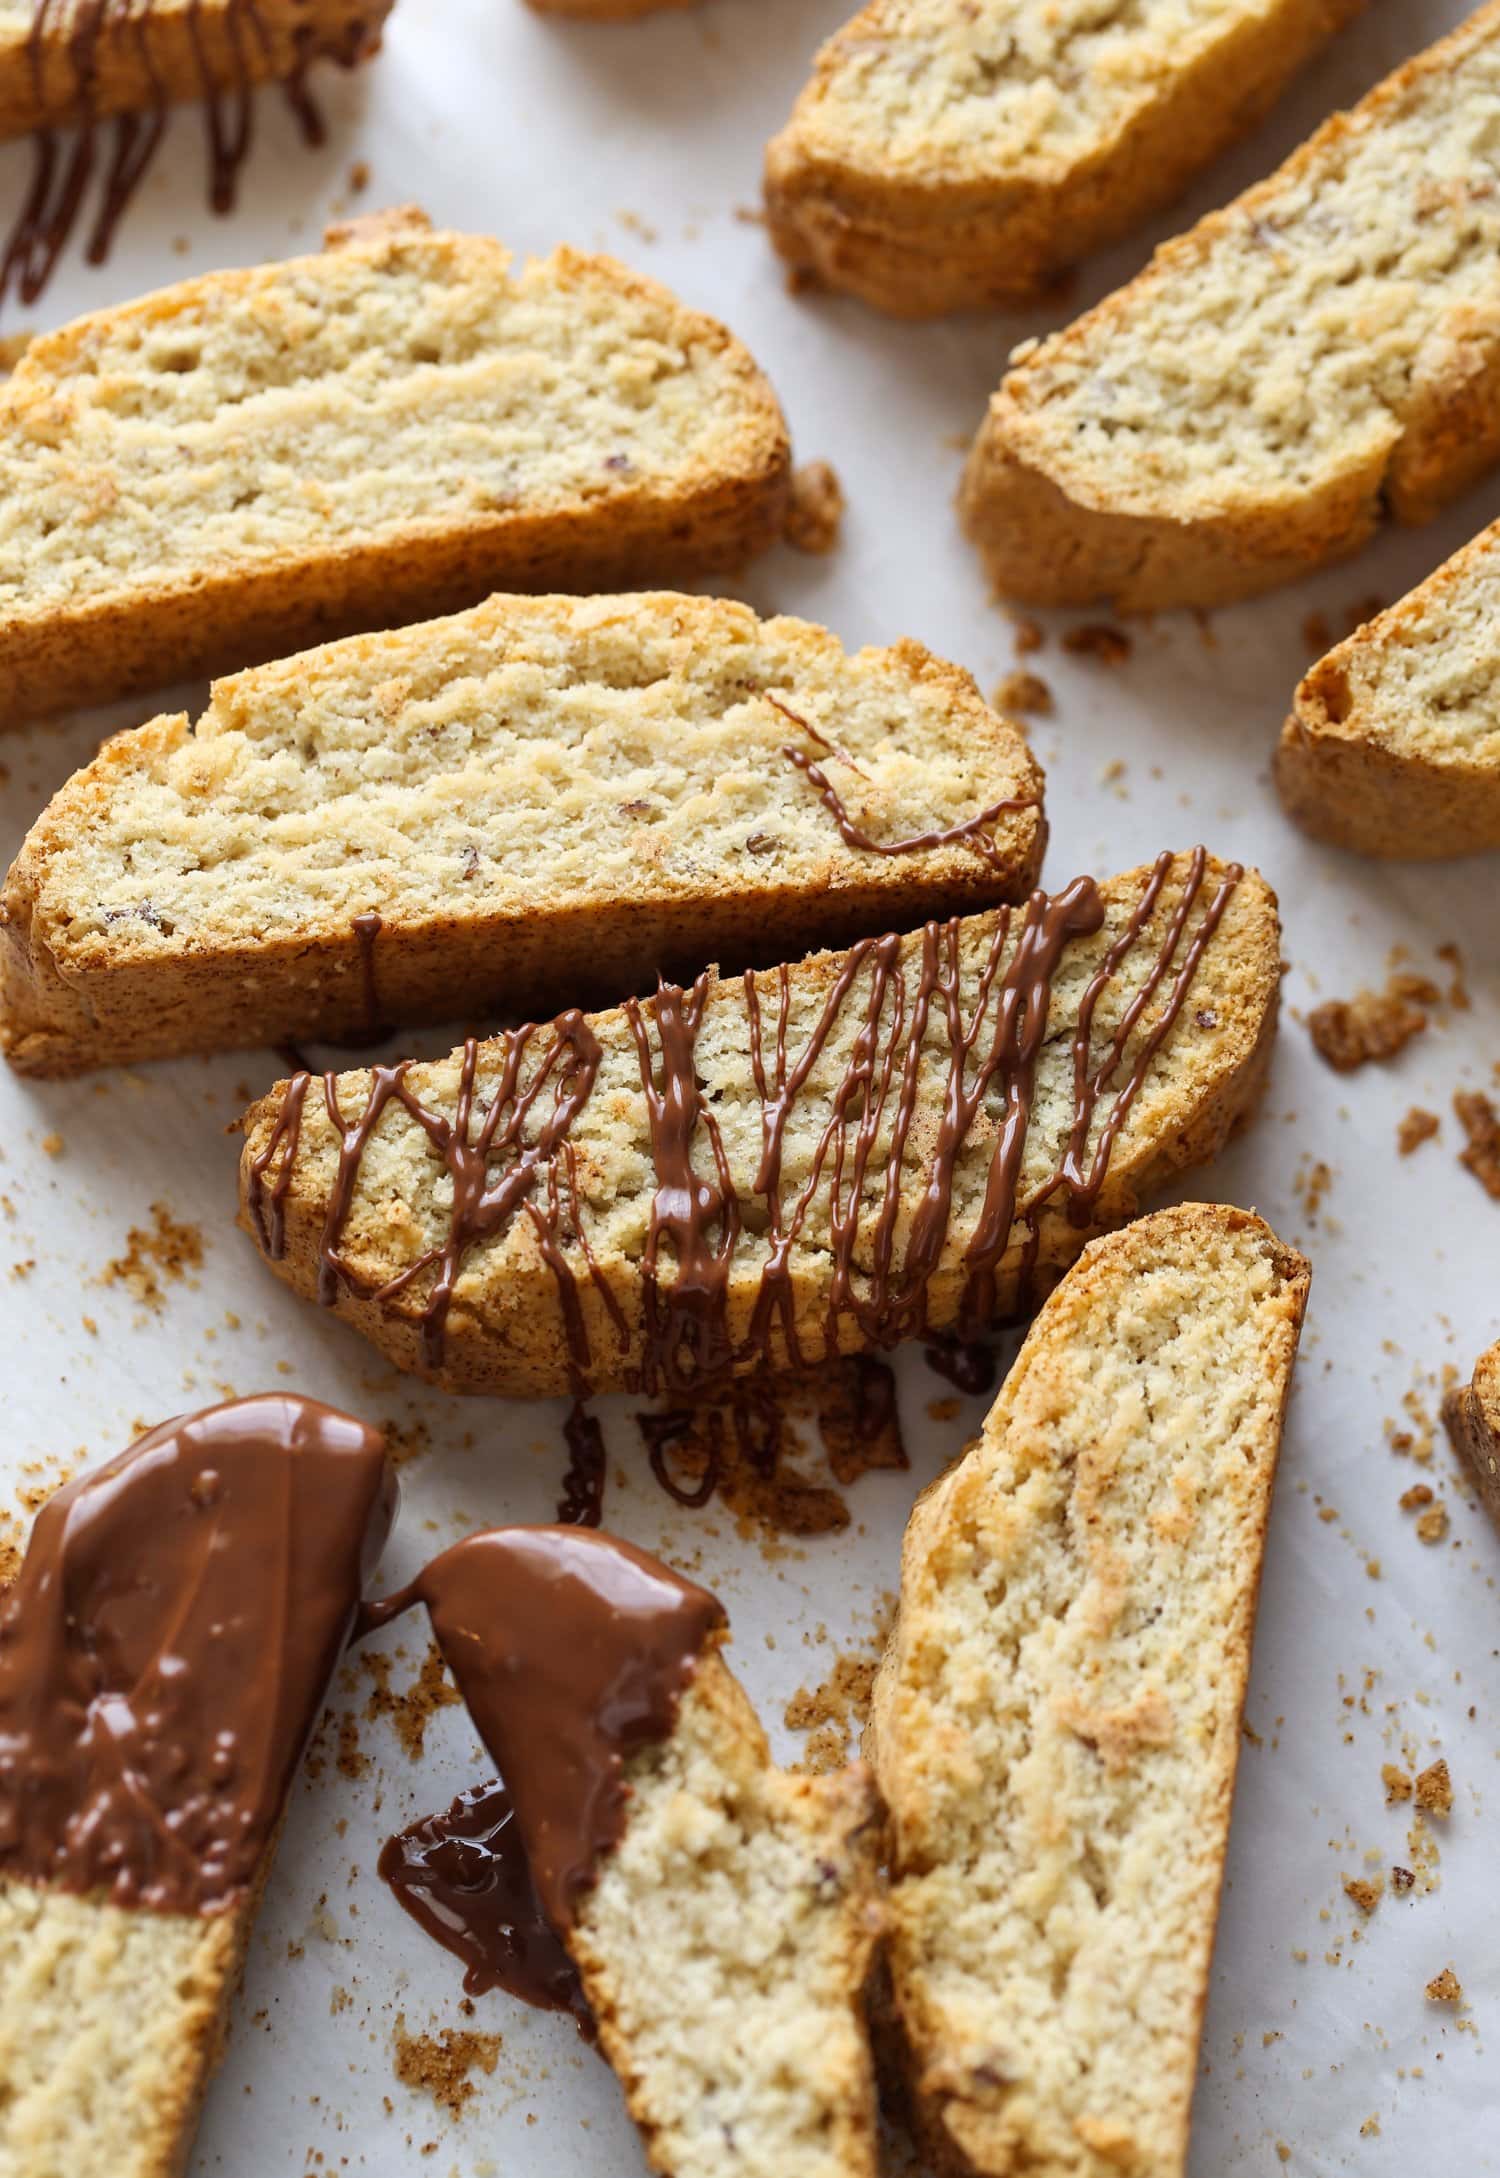 Biscotti drizzled with chocolate.